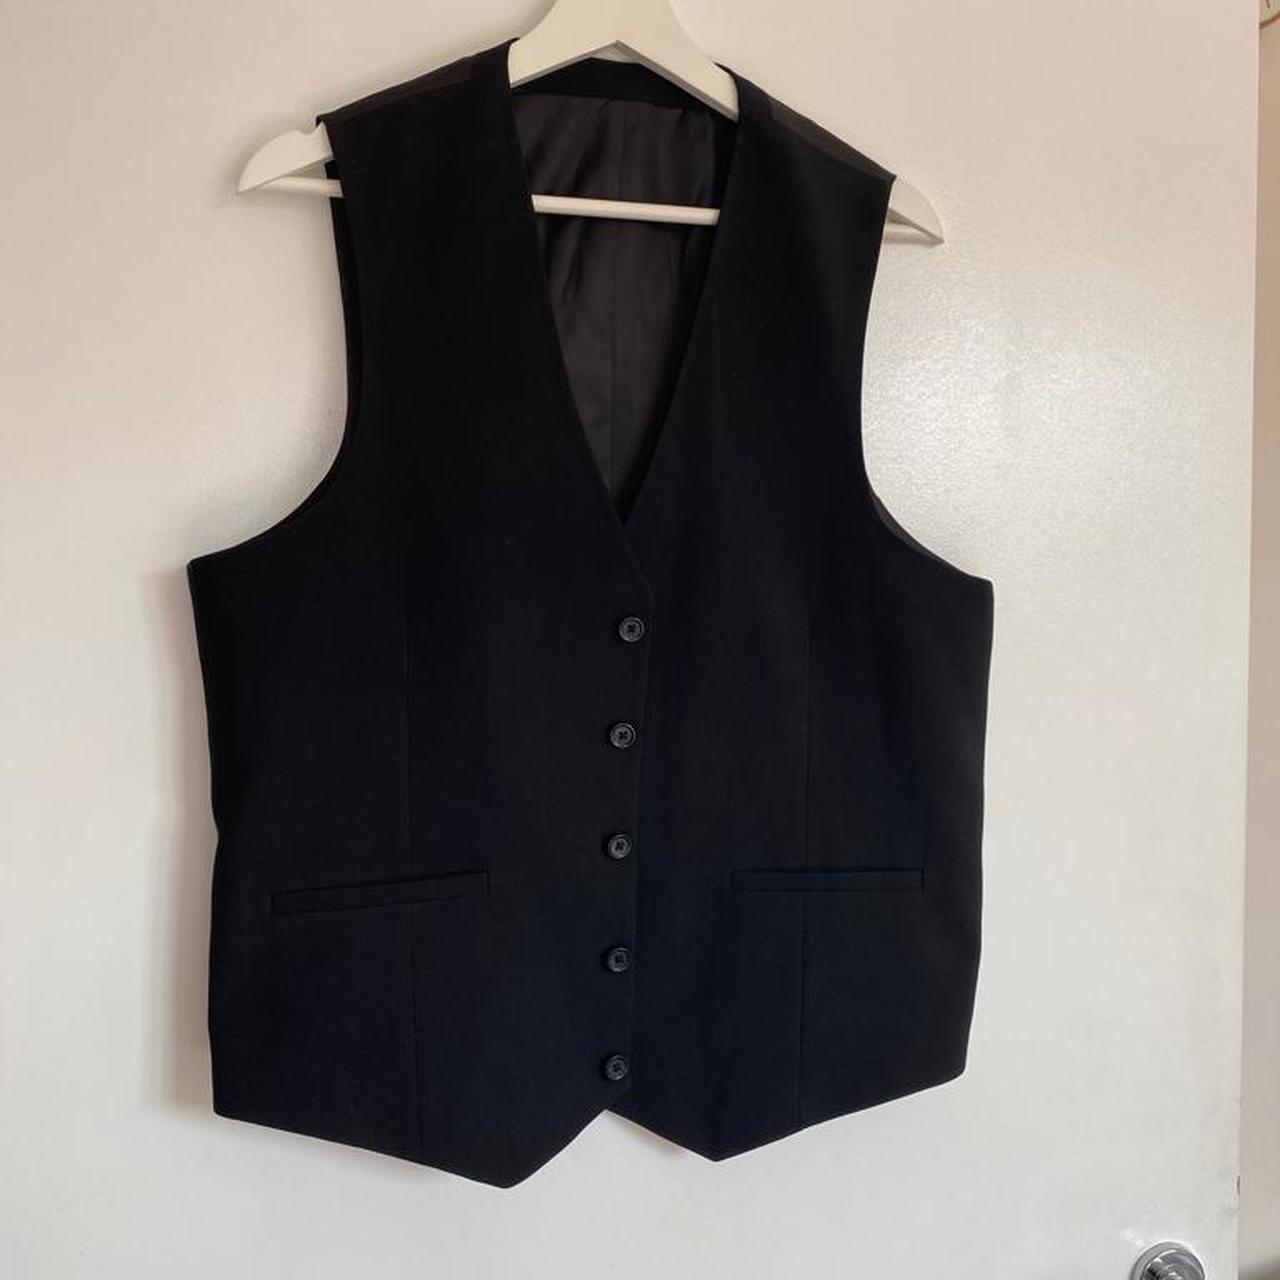 Black waistcoat Been used once Talk to me before... - Depop